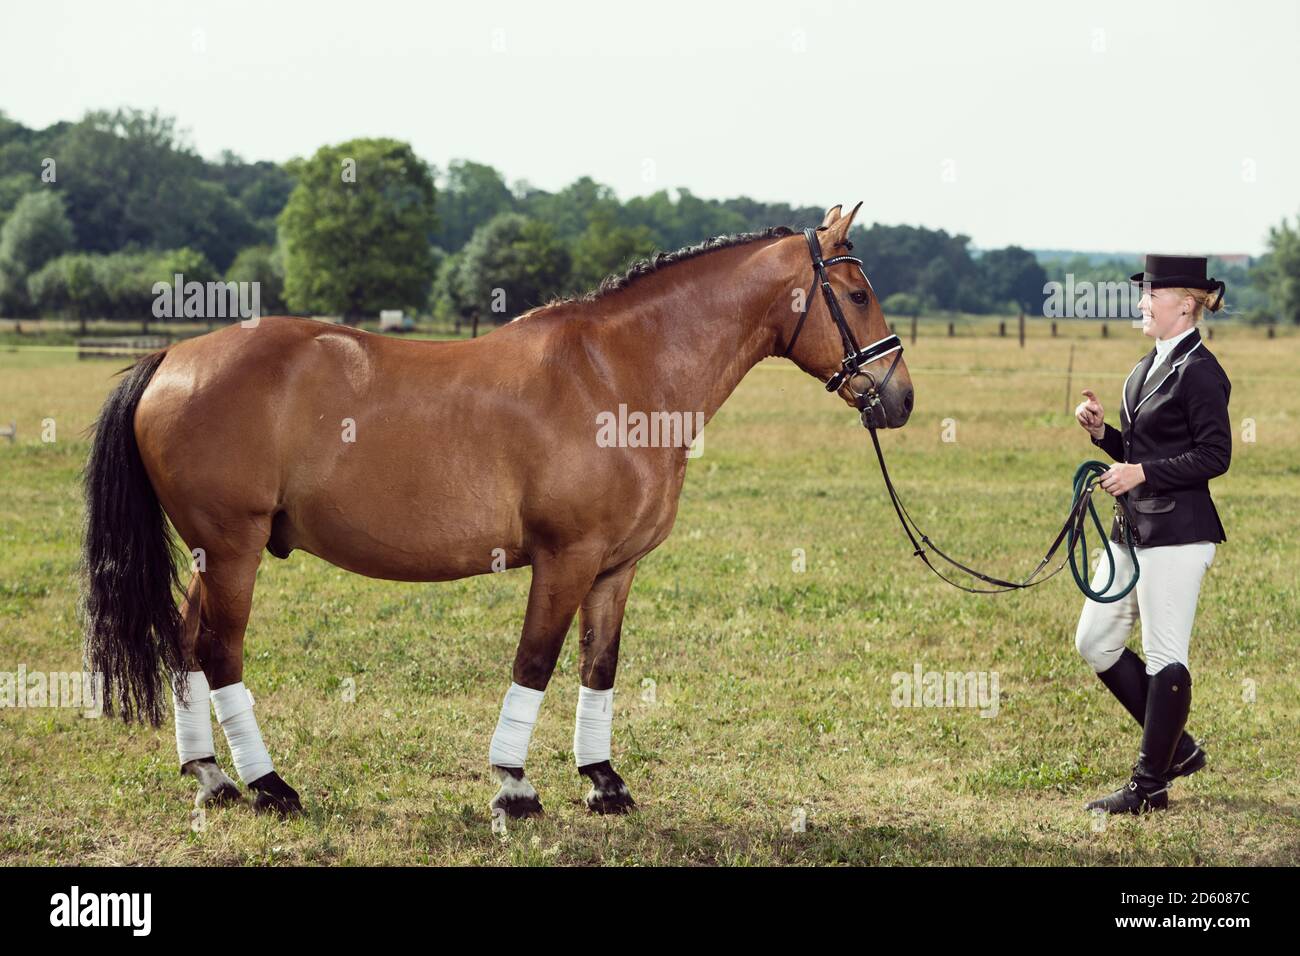 Woman wearing riding gear face to face with horse on a meadow Stock Photo